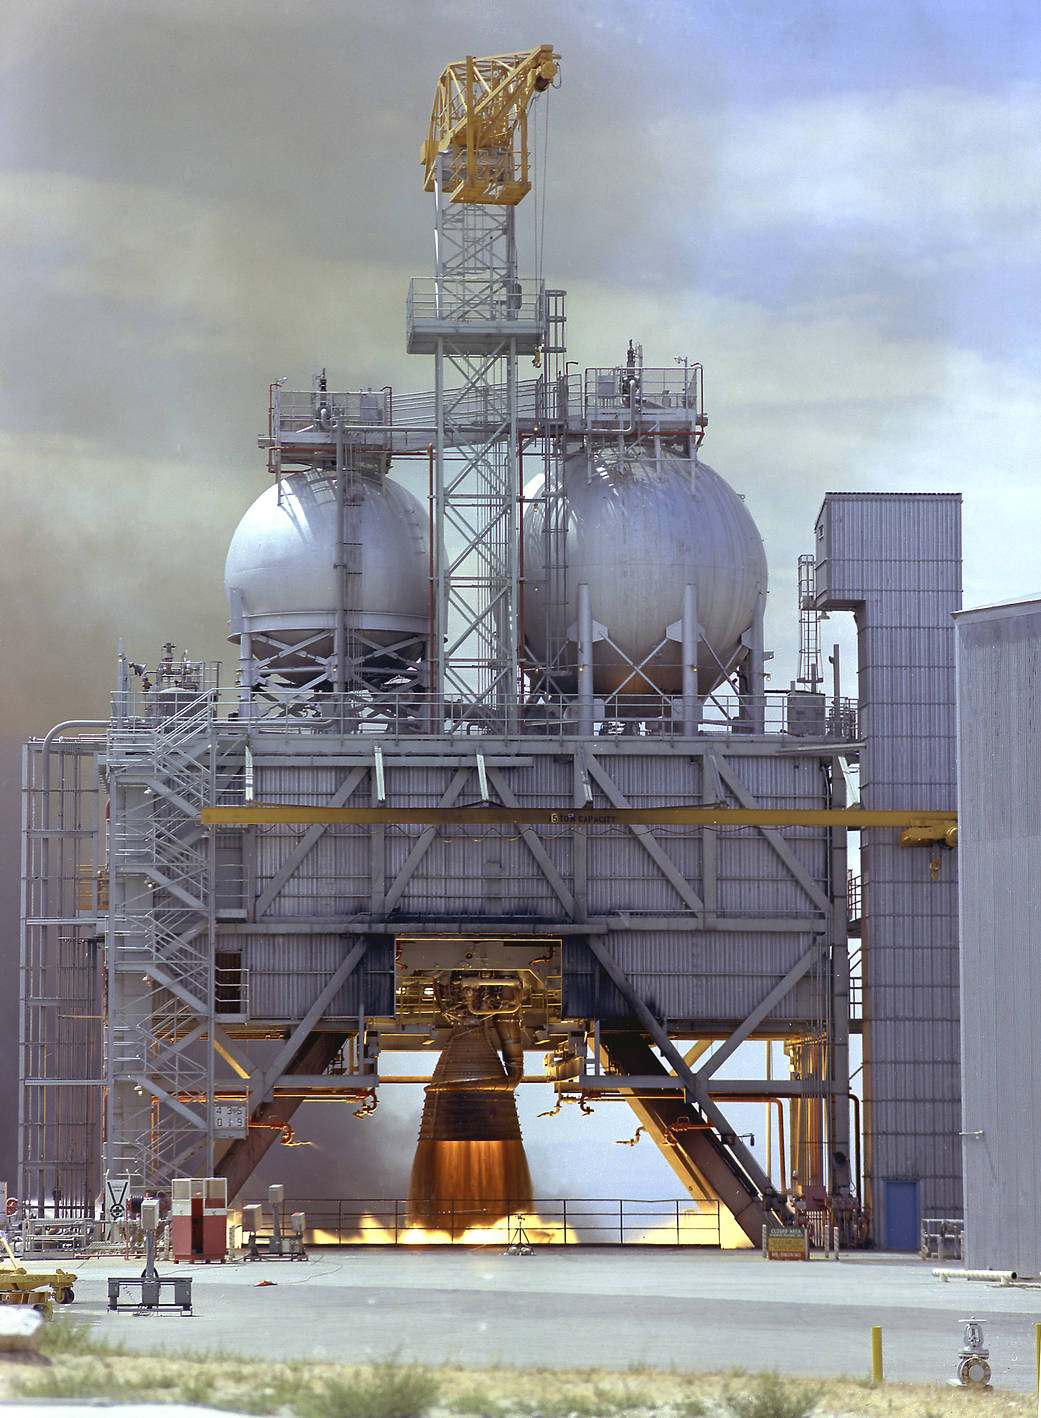 This week in 1962, the first full-thrust, long-duration F-1 engine test was successfully conducted. 